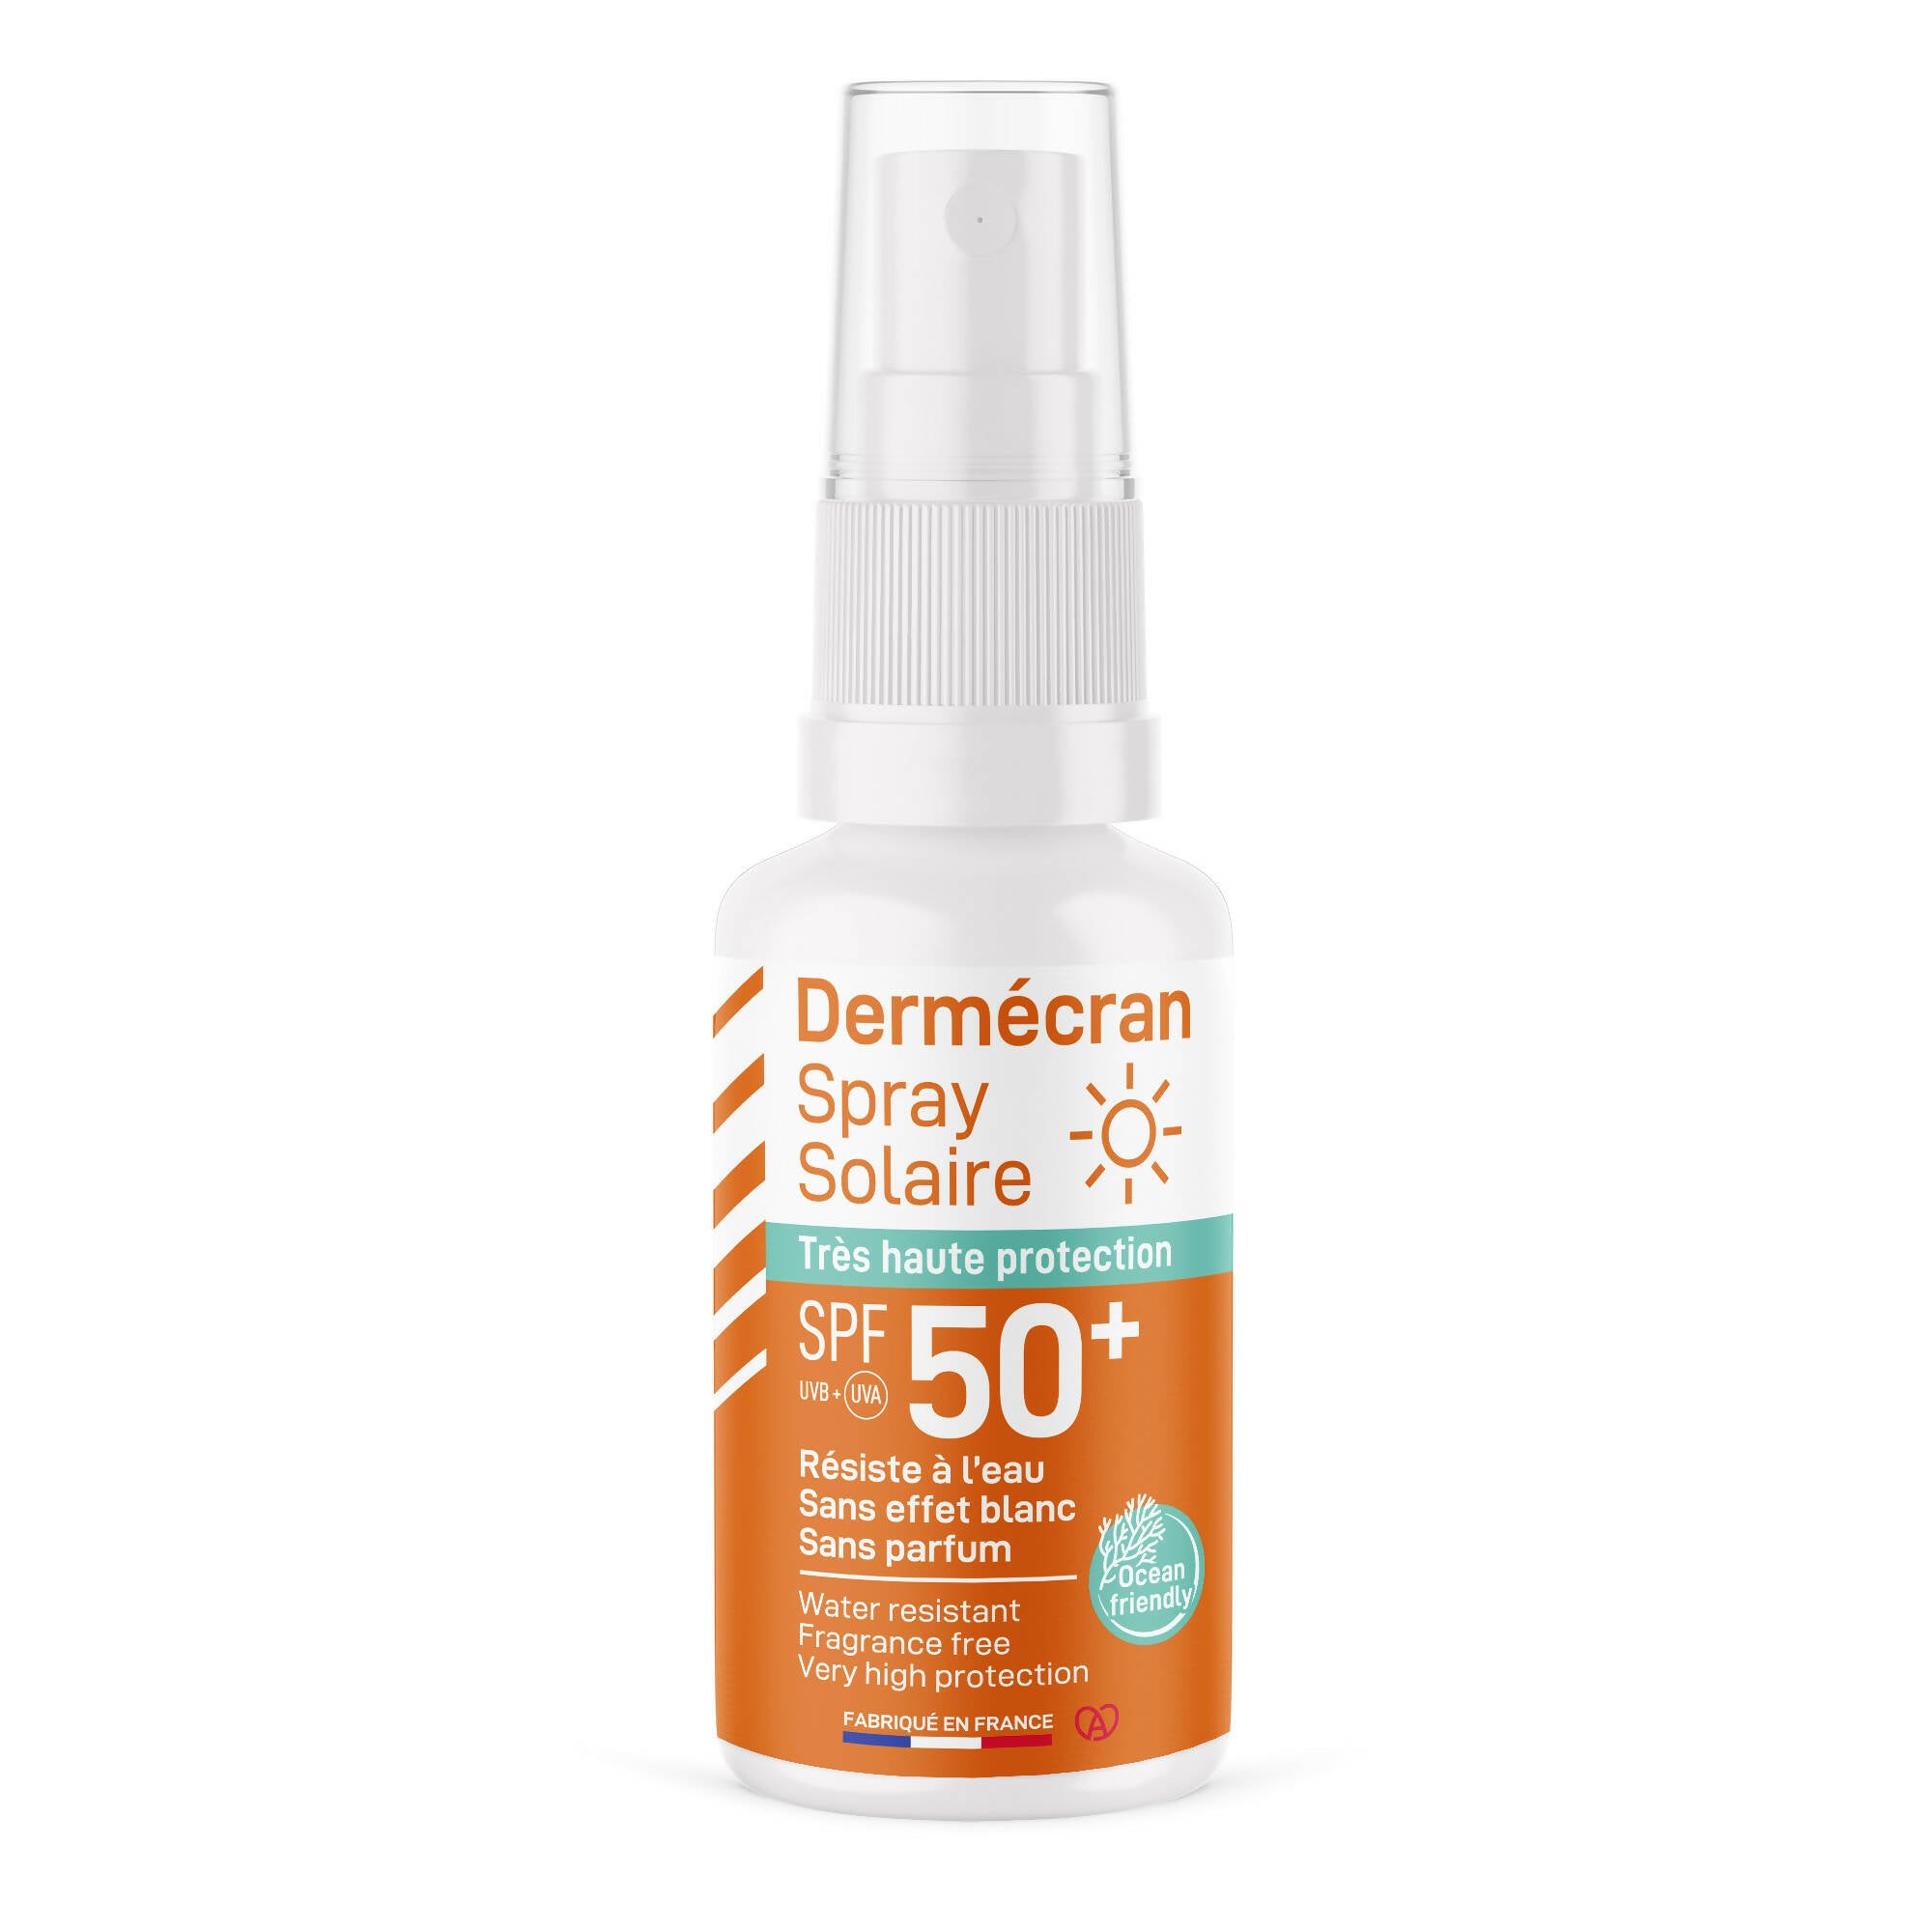 SORIFA - Dermscreen - SPF50+ sun spray - Face and body - Ocean Friendly formula - Water resistant - For the whole family from 3 years old - Made in France - 50 ml spray